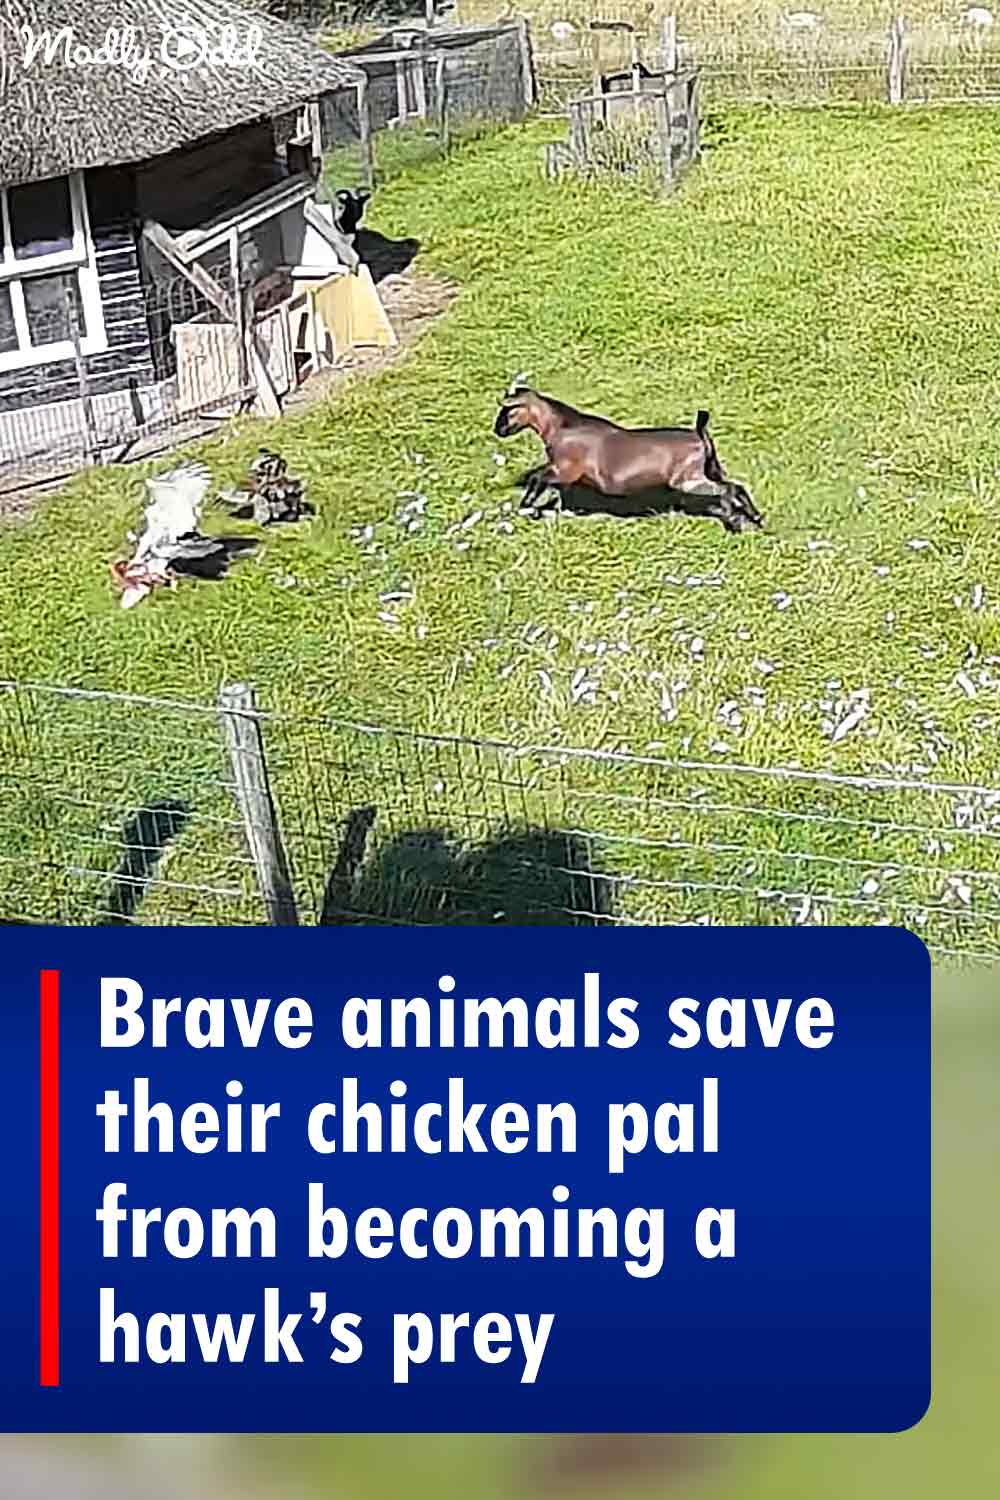 Brave animals save their chicken pal from becoming a hawk’s prey